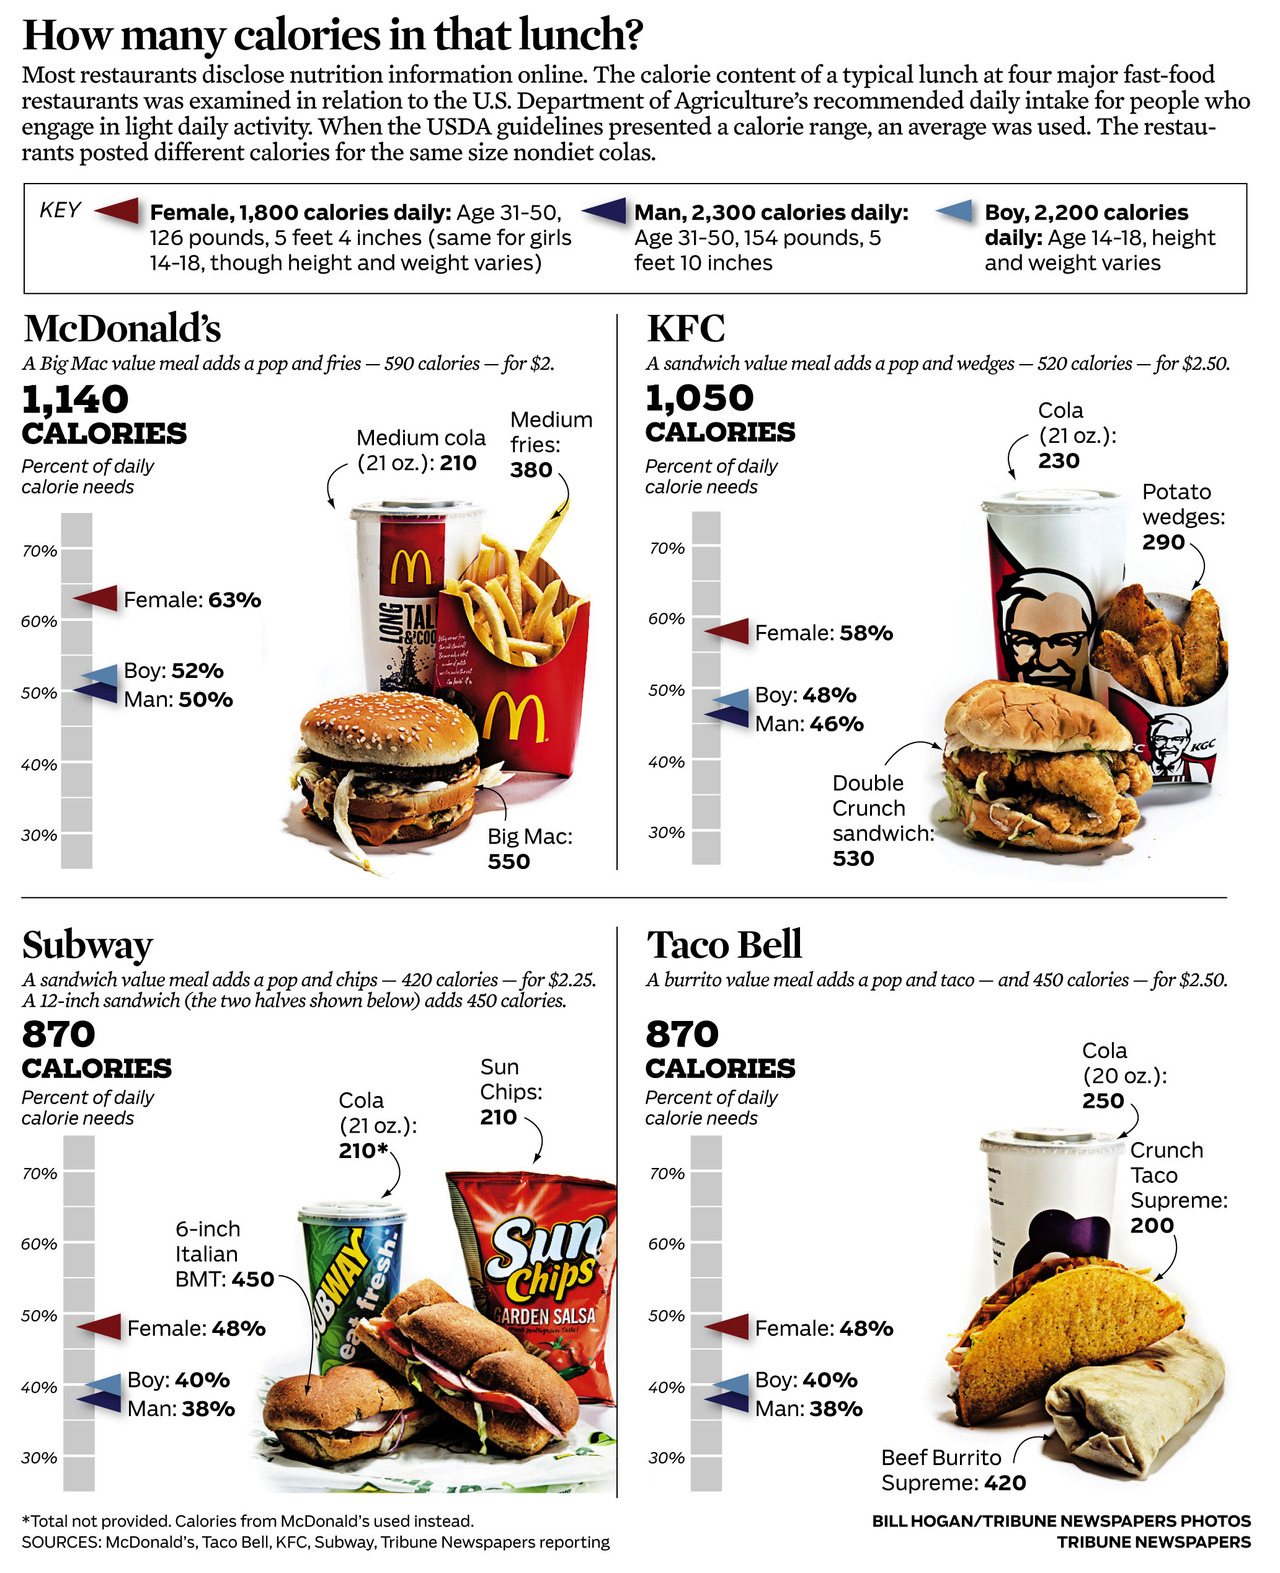 How do you find out how many calories are in food?